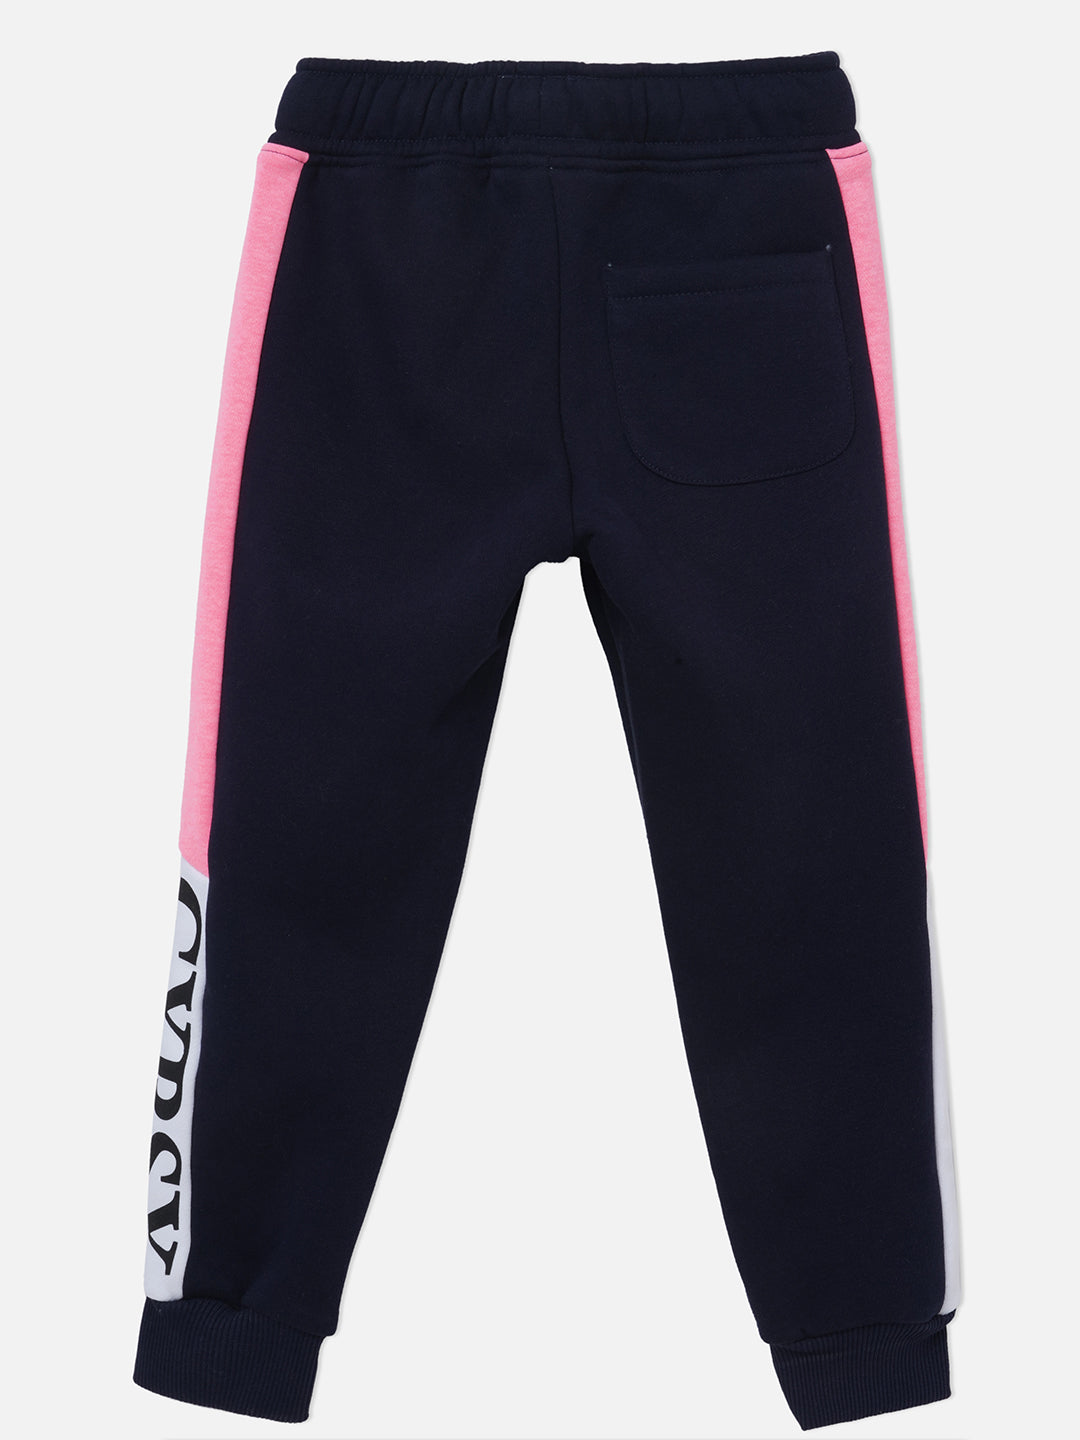 Buy Full Size Track Pants online from Prince Jean's Corner